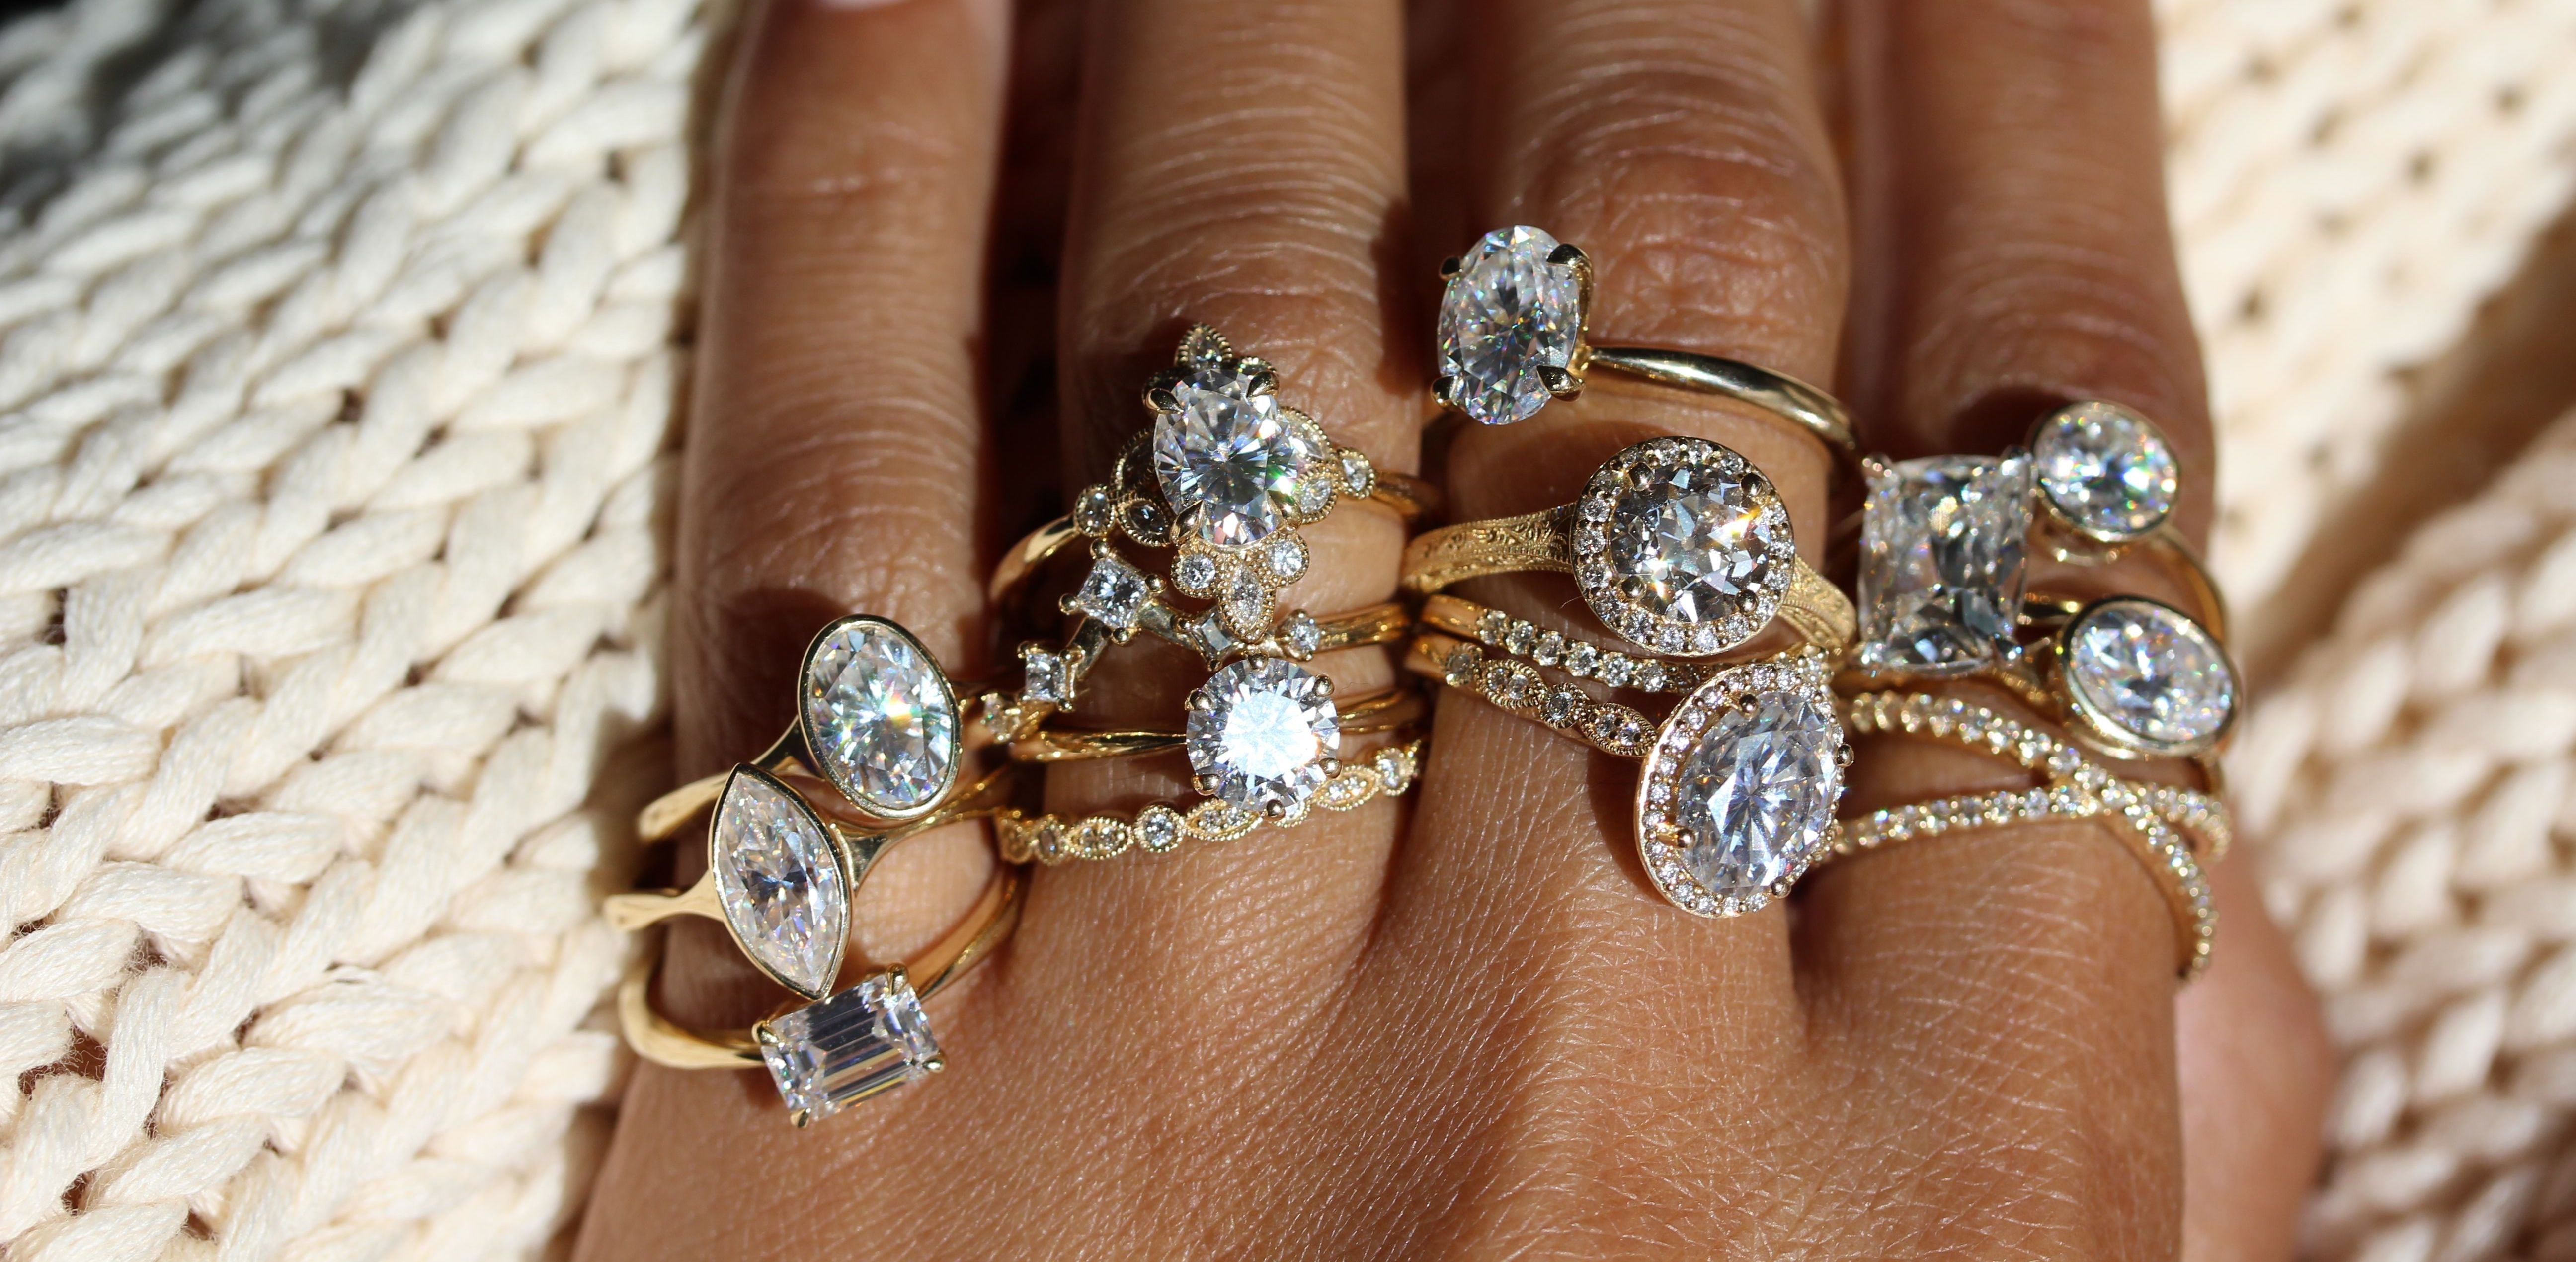 Wedding Rings in New Braunfels, TX | San Anthony Jewelry & Formal